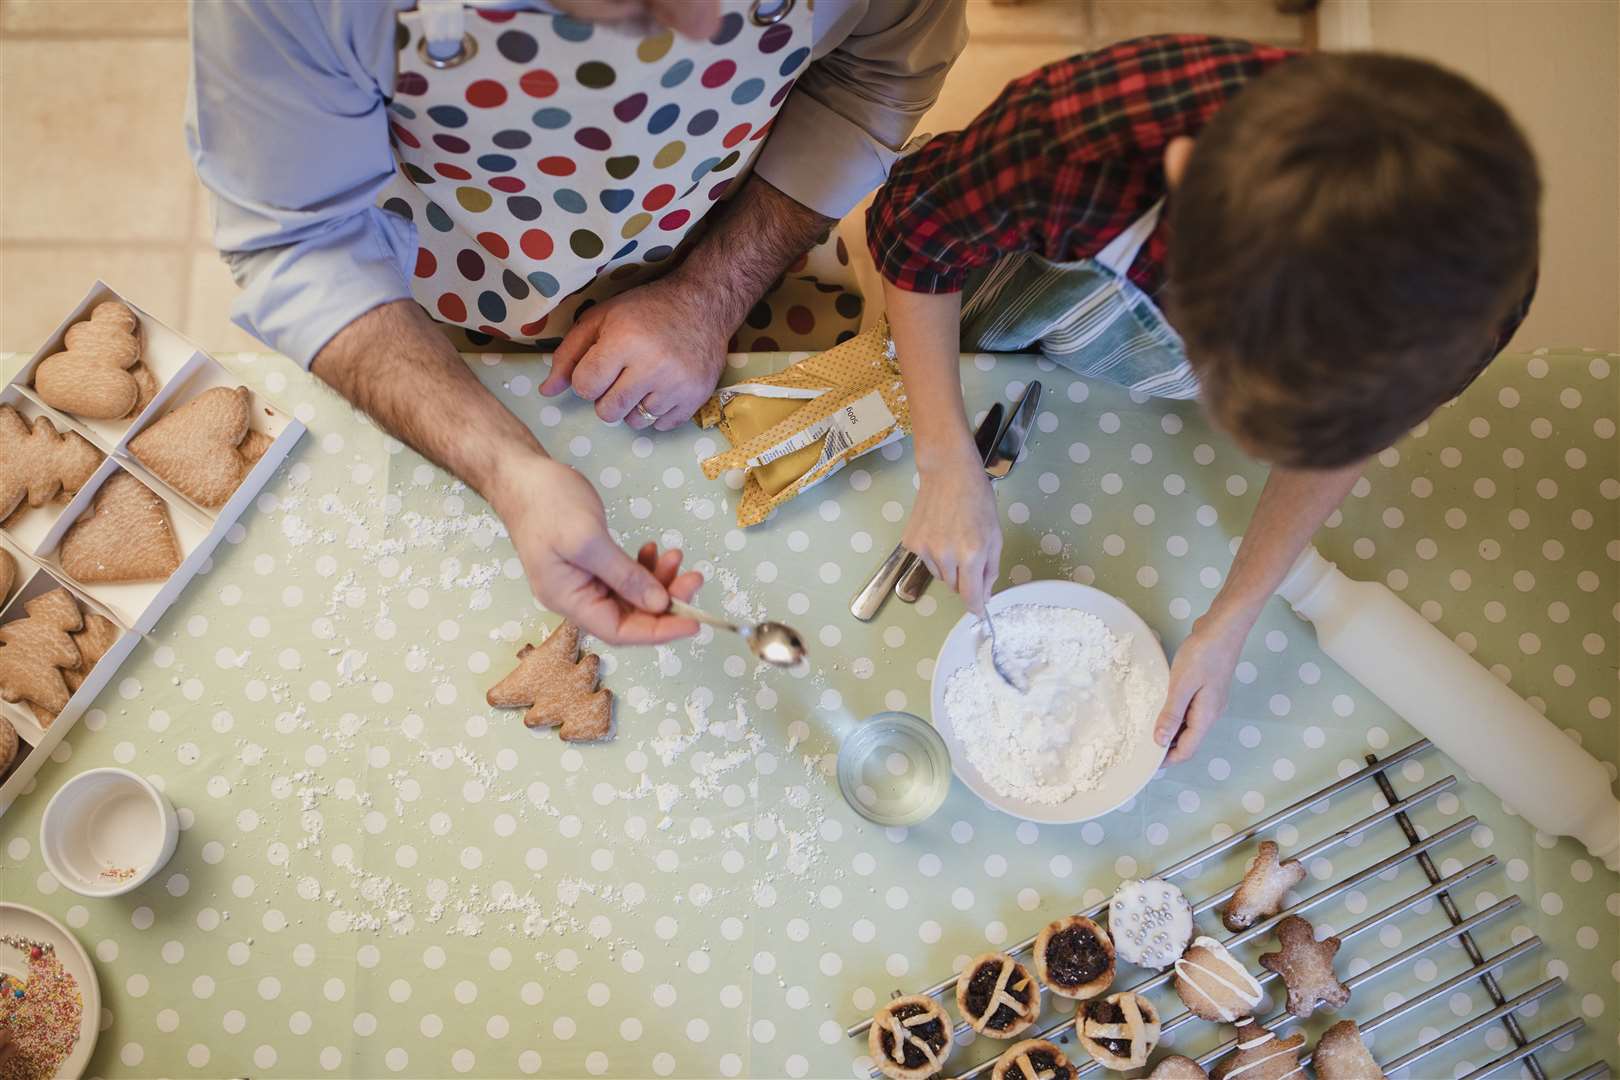 Is making and baking with the kids on your list of festive activities to enjoy?